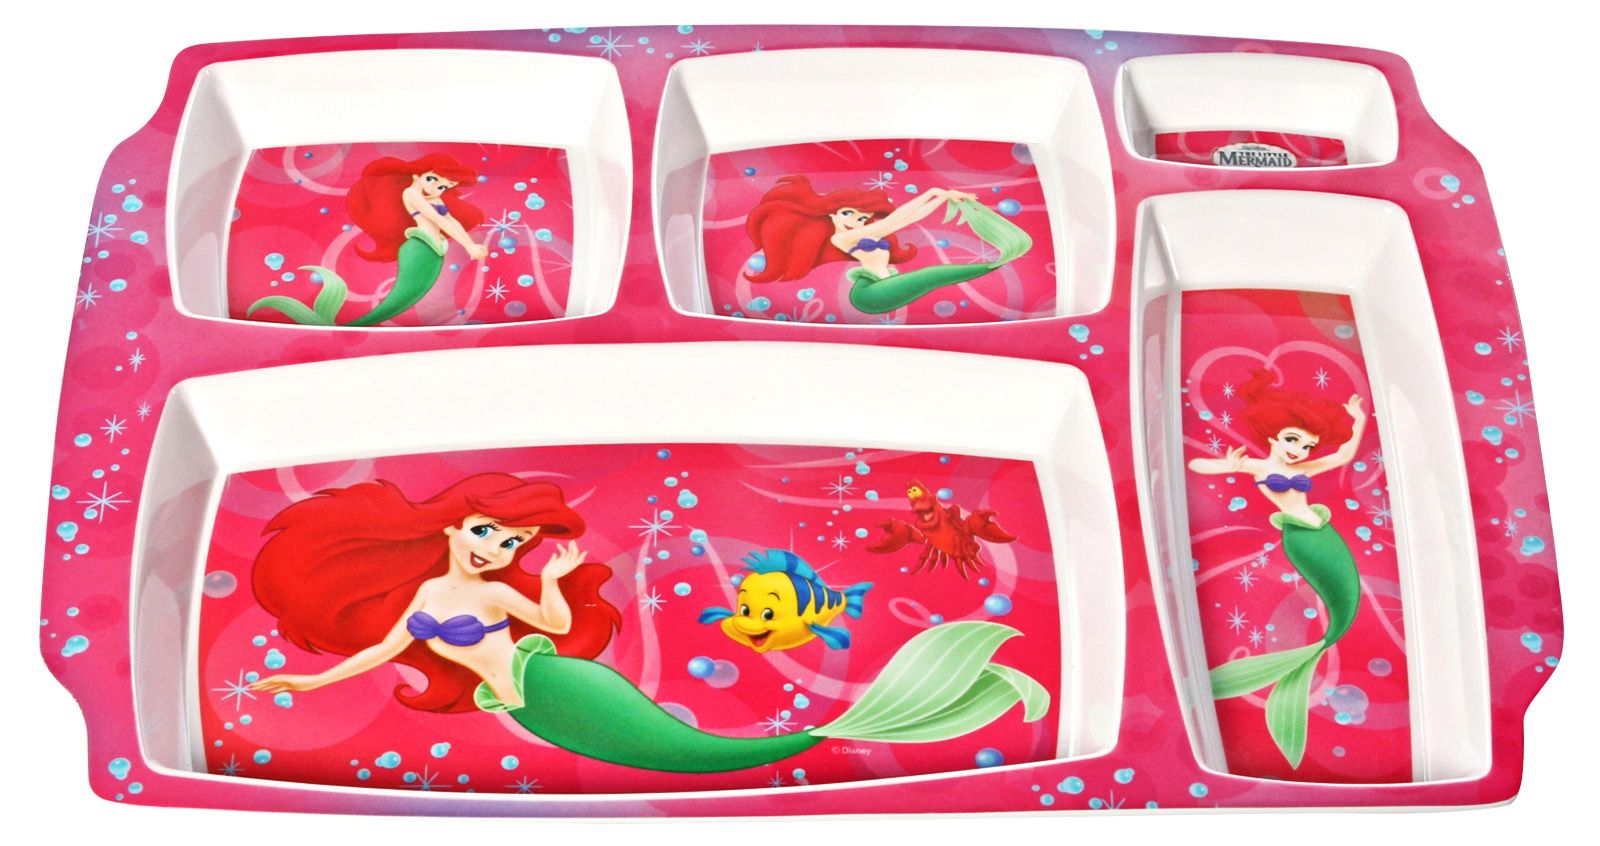 Five Section Plate - The Little Mermaid